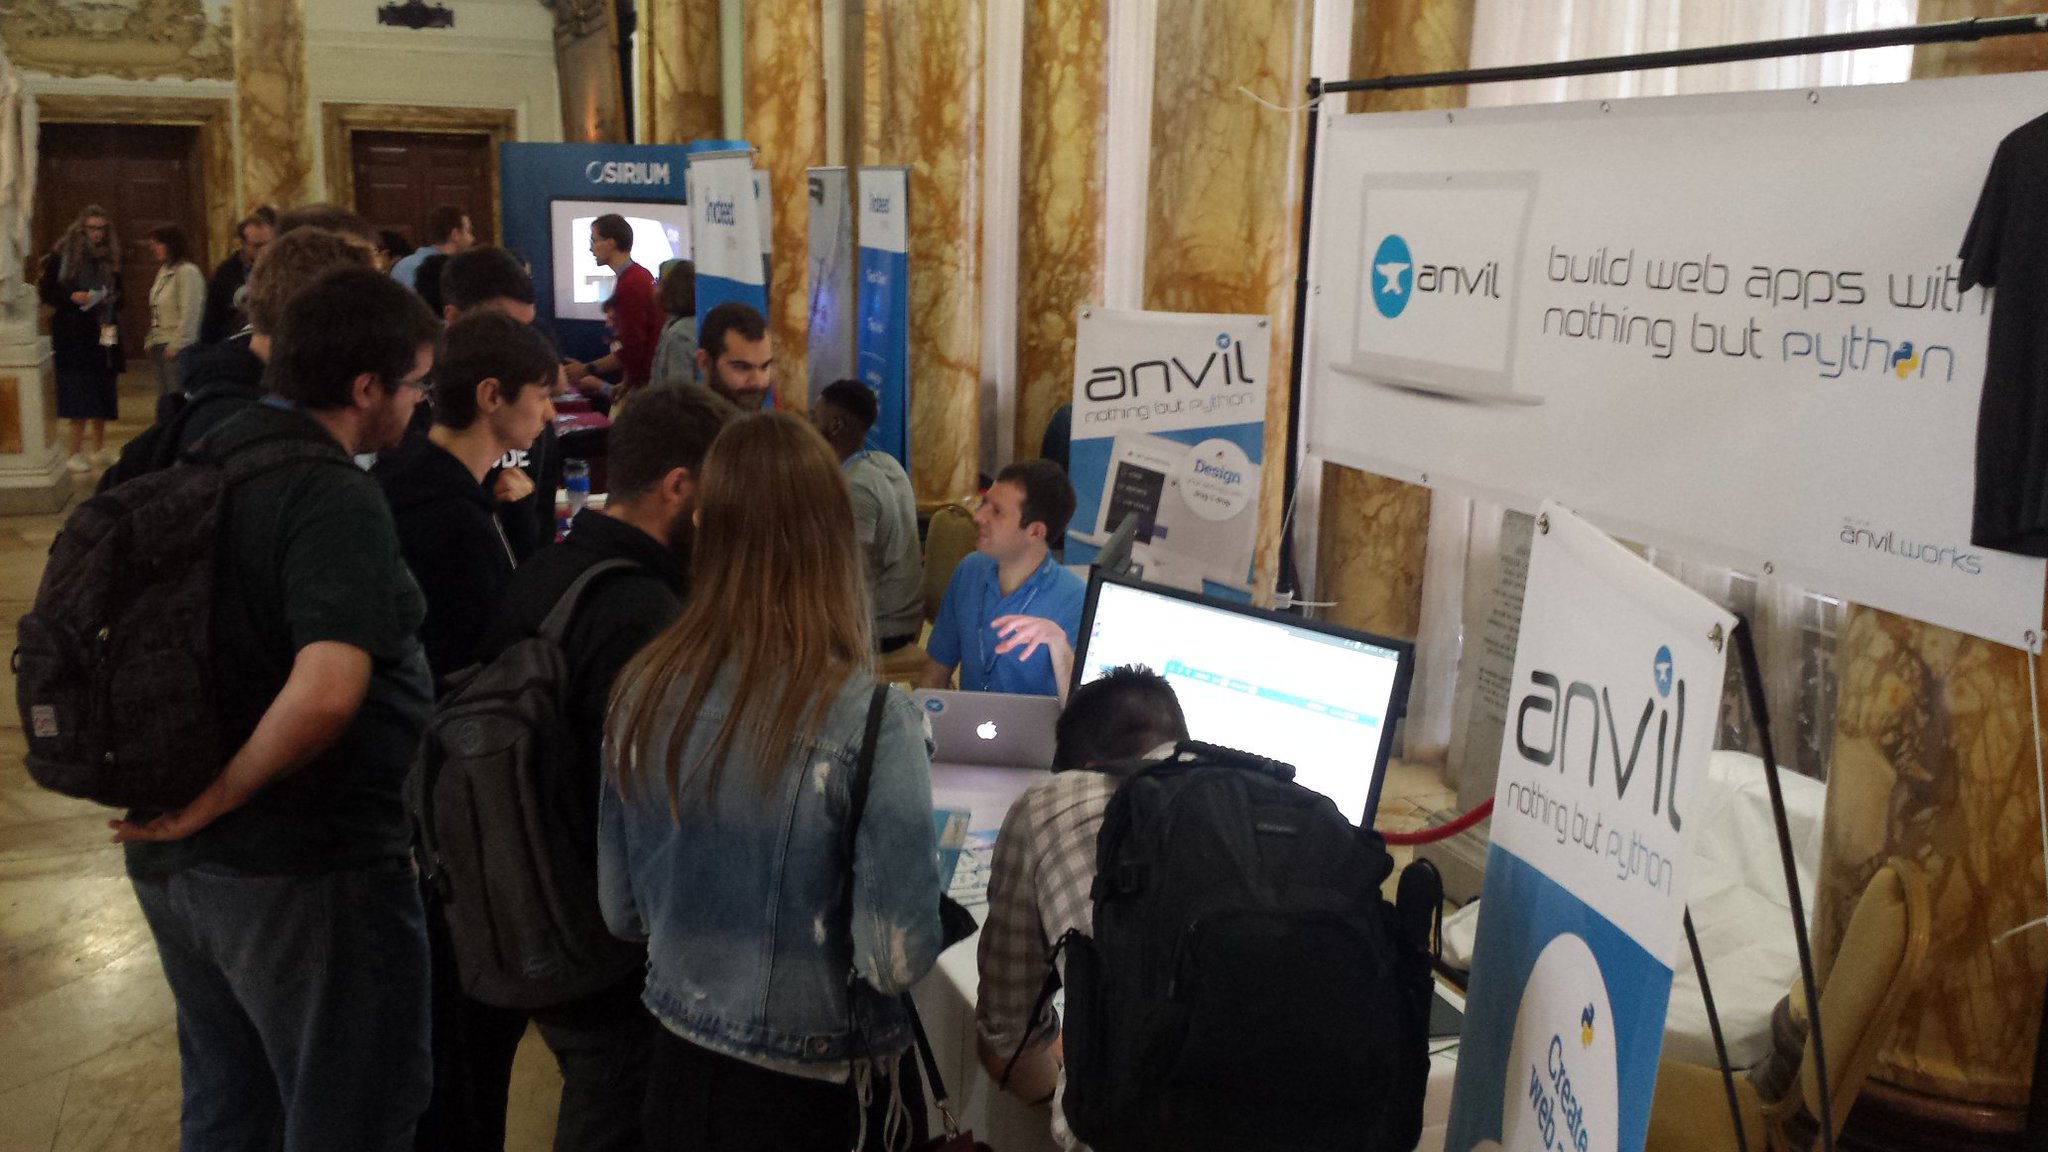 PyCon attendees flooding the Anvil stand. This is the only photo I got - mostly I was there, helping out!